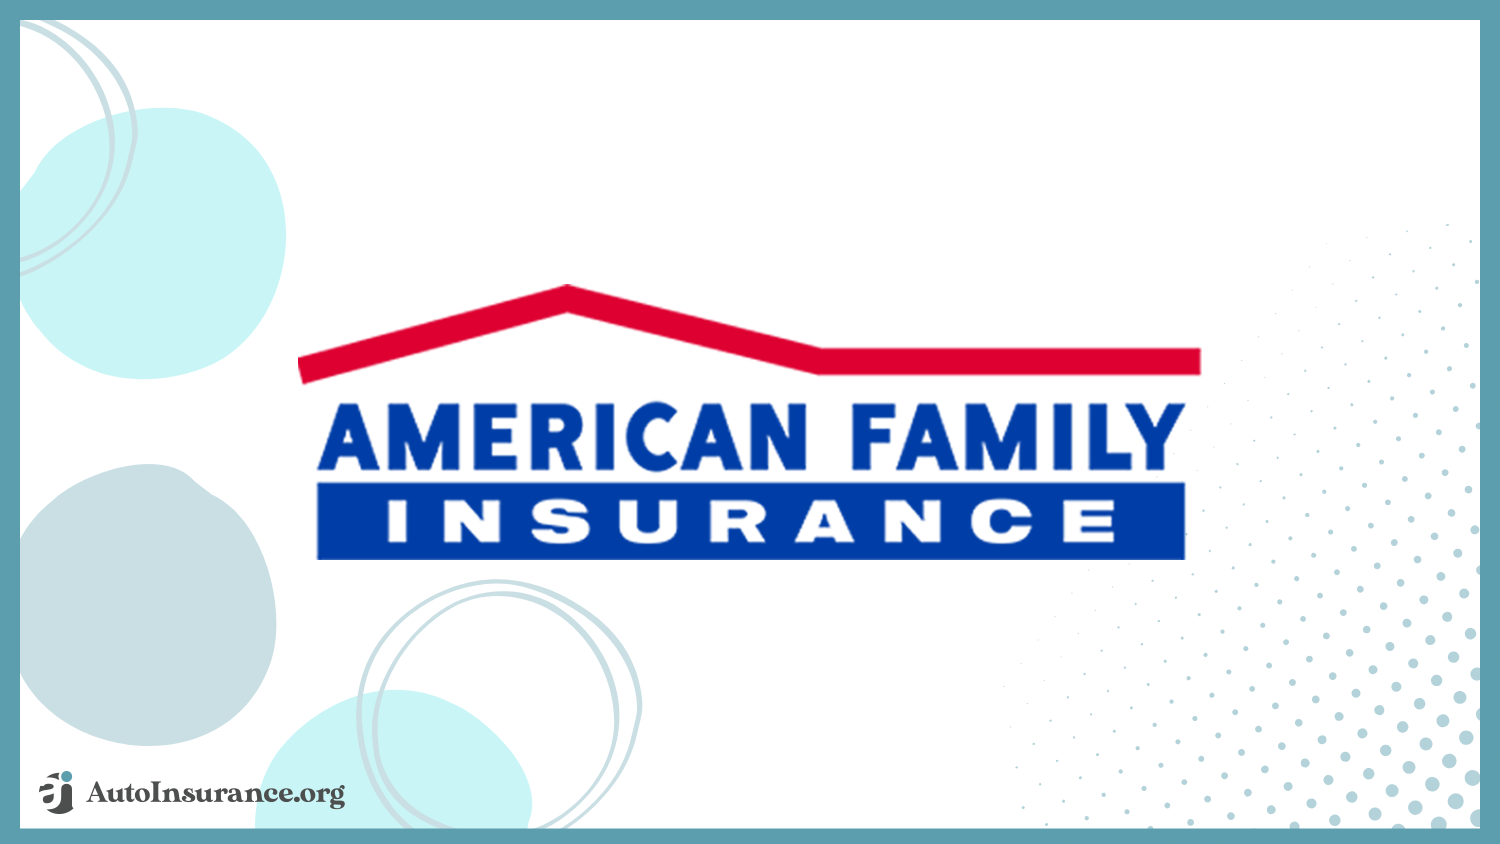 American Family: Best Auto Insurance for Limousines